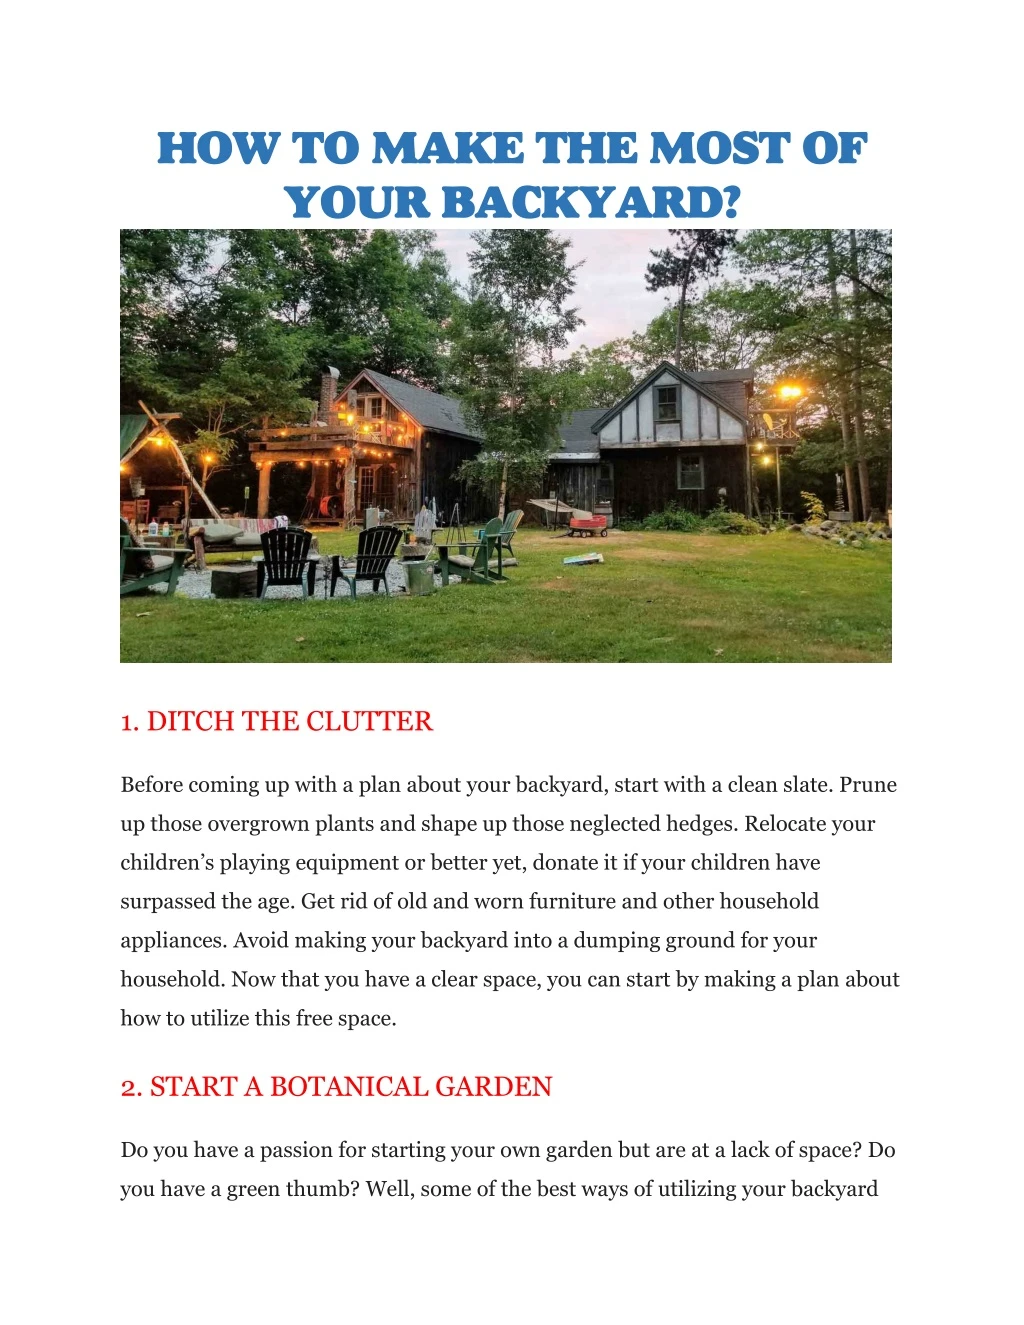 how to make the most of your backyard